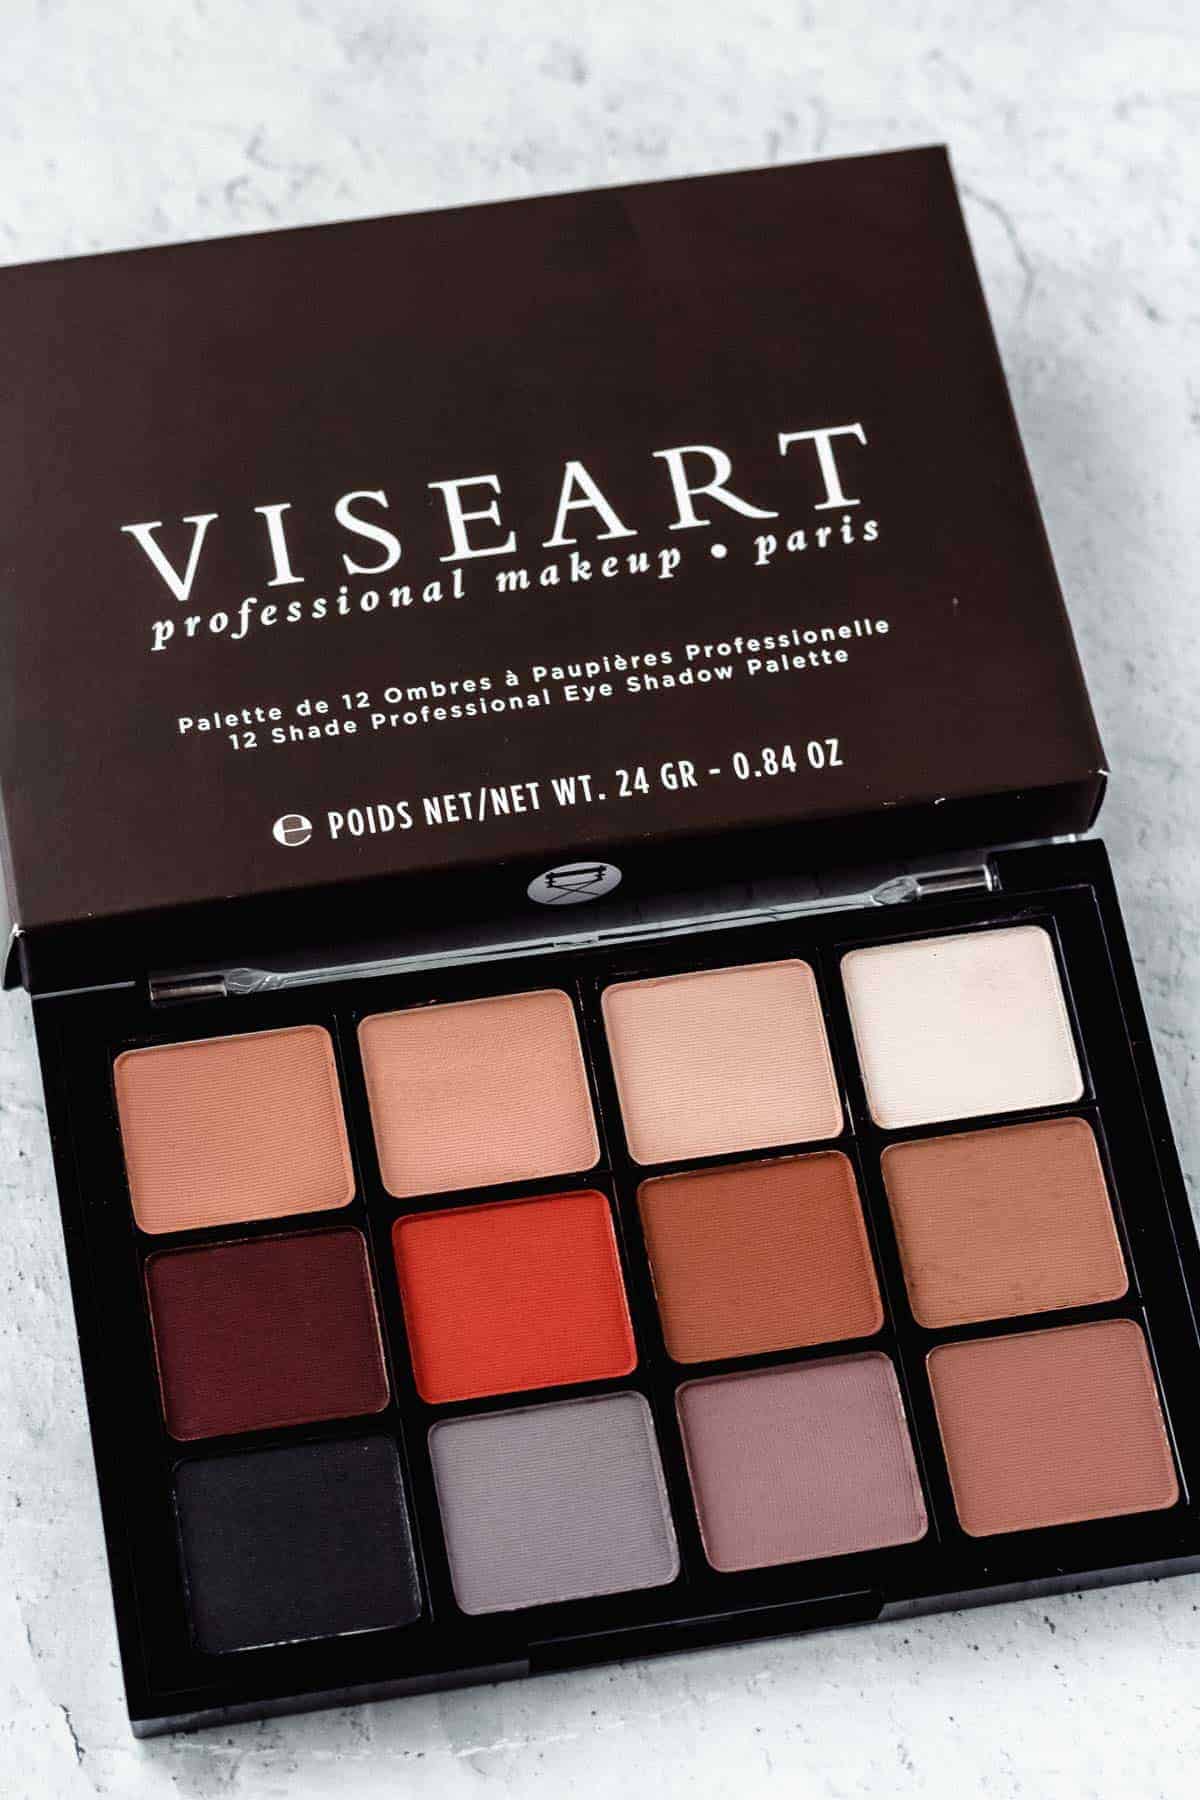 viseart neutral eye shadow palette opened on a white background